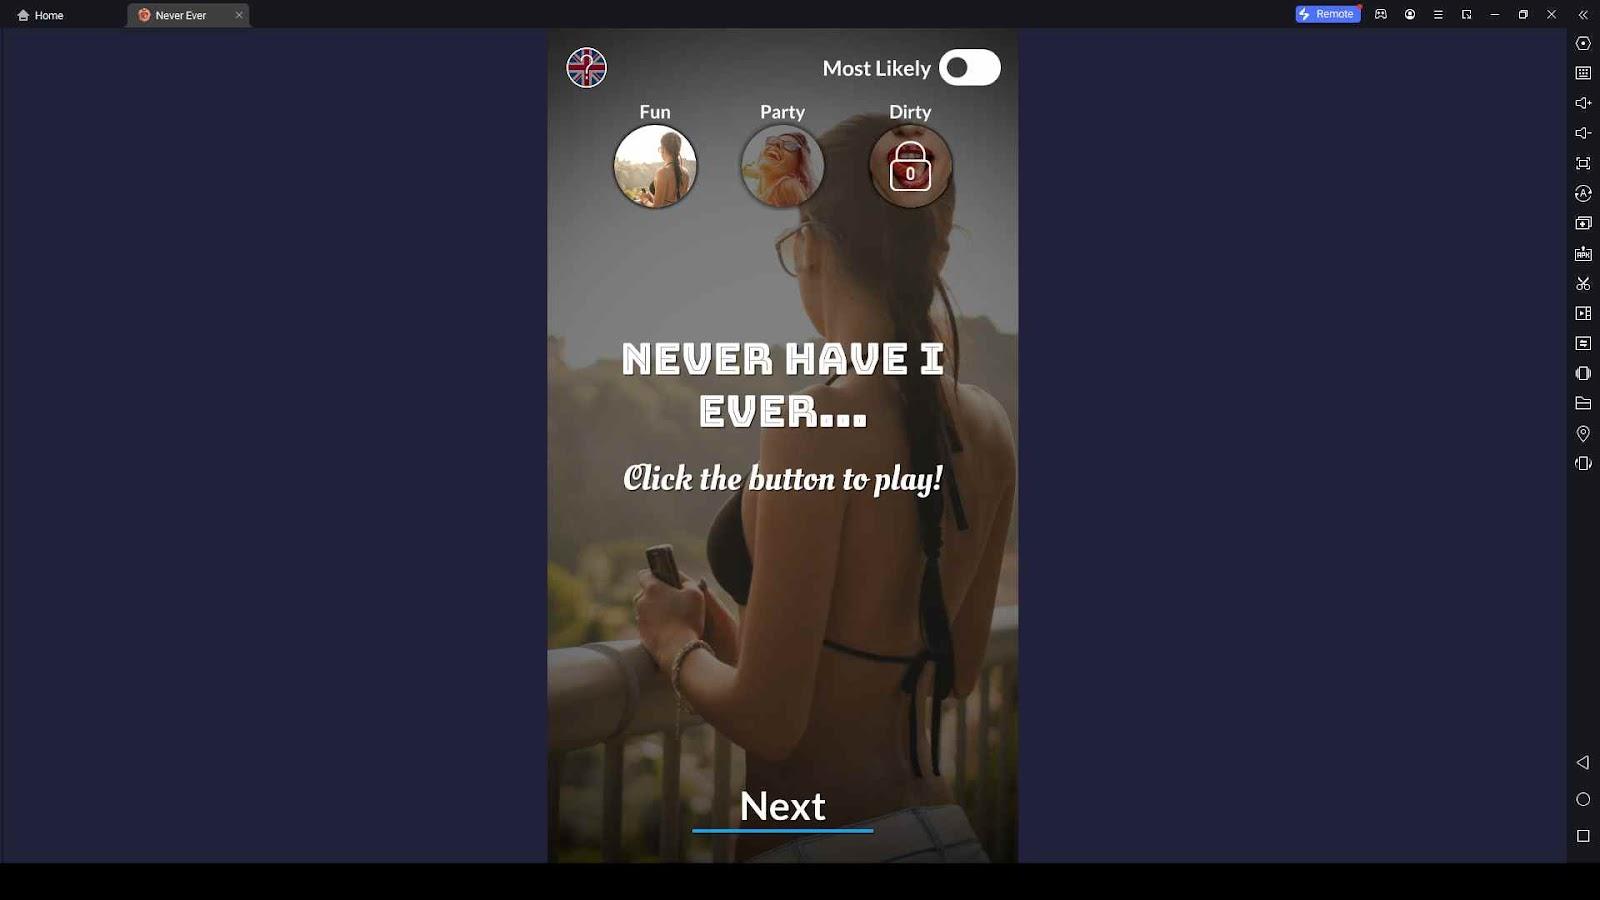 Never Have I Ever: Dirty 18+